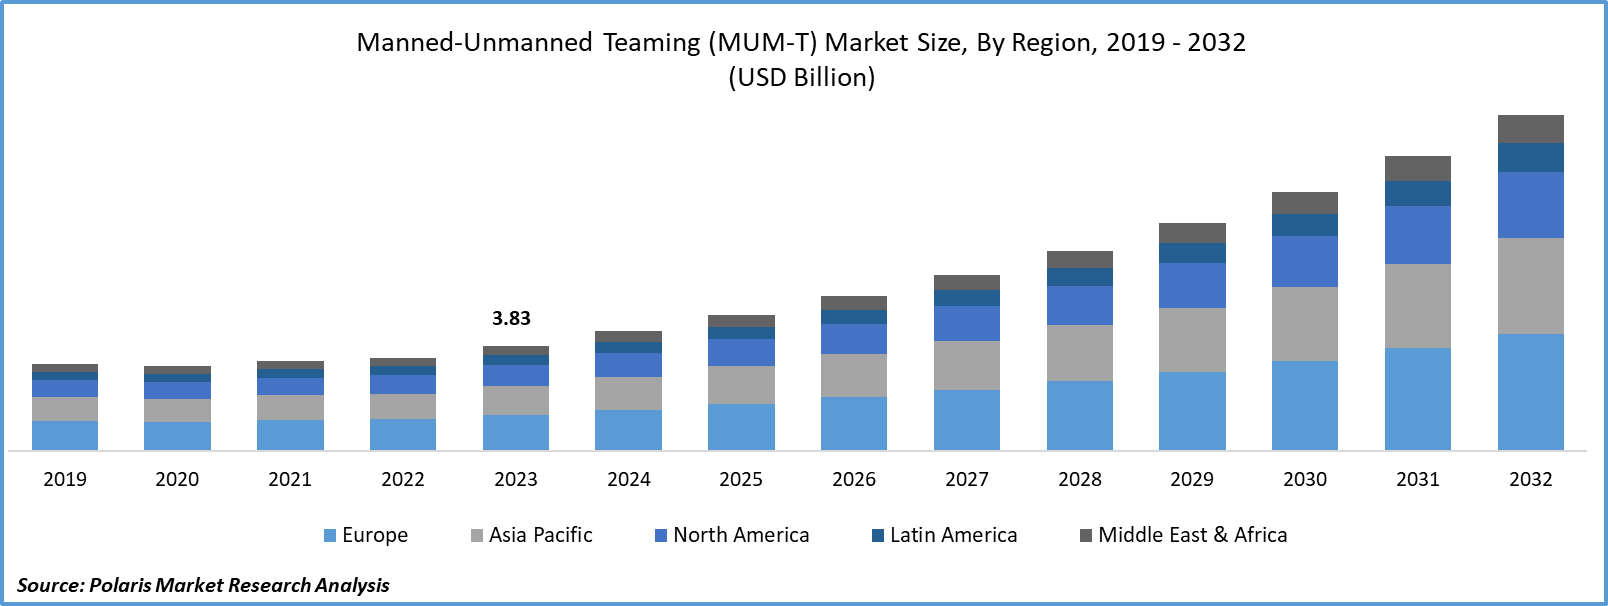 Manned-Unmanned Teaming (MUM-T) Market Size